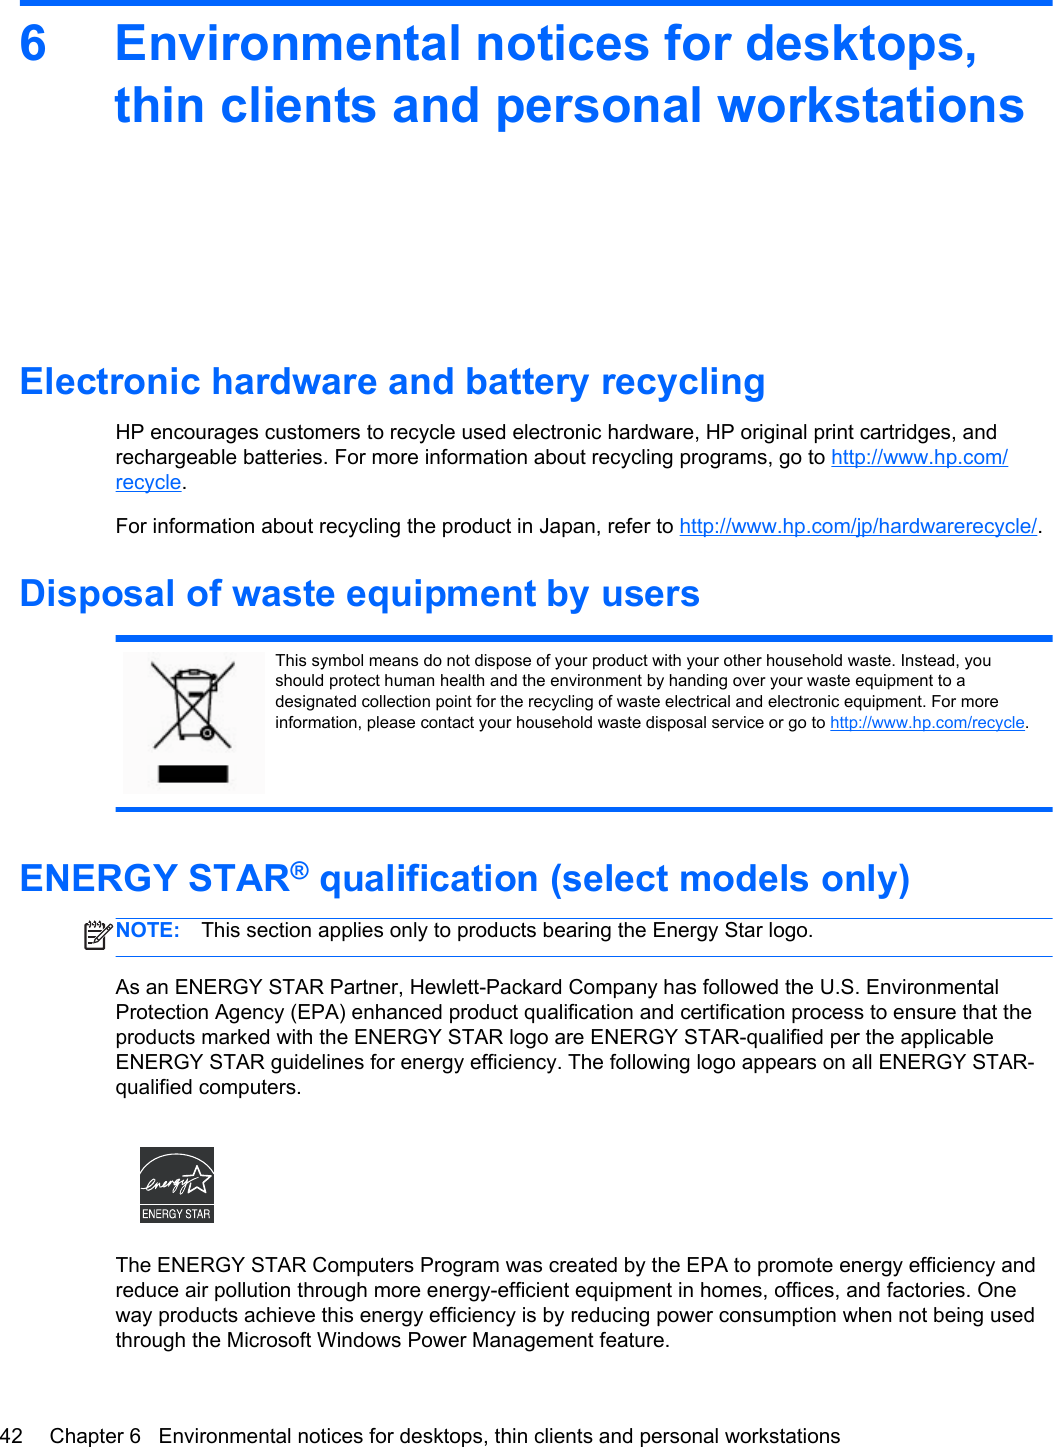 6 Environmental notices for desktops,thin clients and personal workstationsElectronic hardware and battery recyclingHP encourages customers to recycle used electronic hardware, HP original print cartridges, andrechargeable batteries. For more information about recycling programs, go to http://www.hp.com/recycle.For information about recycling the product in Japan, refer to http://www.hp.com/jp/hardwarerecycle/.Disposal of waste equipment by usersThis symbol means do not dispose of your product with your other household waste. Instead, youshould protect human health and the environment by handing over your waste equipment to adesignated collection point for the recycling of waste electrical and electronic equipment. For moreinformation, please contact your household waste disposal service or go to http://www.hp.com/recycle.ENERGY STAR® qualification (select models only)NOTE: This section applies only to products bearing the Energy Star logo.As an ENERGY STAR Partner, Hewlett-Packard Company has followed the U.S. EnvironmentalProtection Agency (EPA) enhanced product qualification and certification process to ensure that theproducts marked with the ENERGY STAR logo are ENERGY STAR-qualified per the applicableENERGY STAR guidelines for energy efficiency. The following logo appears on all ENERGY STAR-qualified computers.The ENERGY STAR Computers Program was created by the EPA to promote energy efficiency andreduce air pollution through more energy-efficient equipment in homes, offices, and factories. Oneway products achieve this energy efficiency is by reducing power consumption when not being usedthrough the Microsoft Windows Power Management feature.42 Chapter 6   Environmental notices for desktops, thin clients and personal workstations